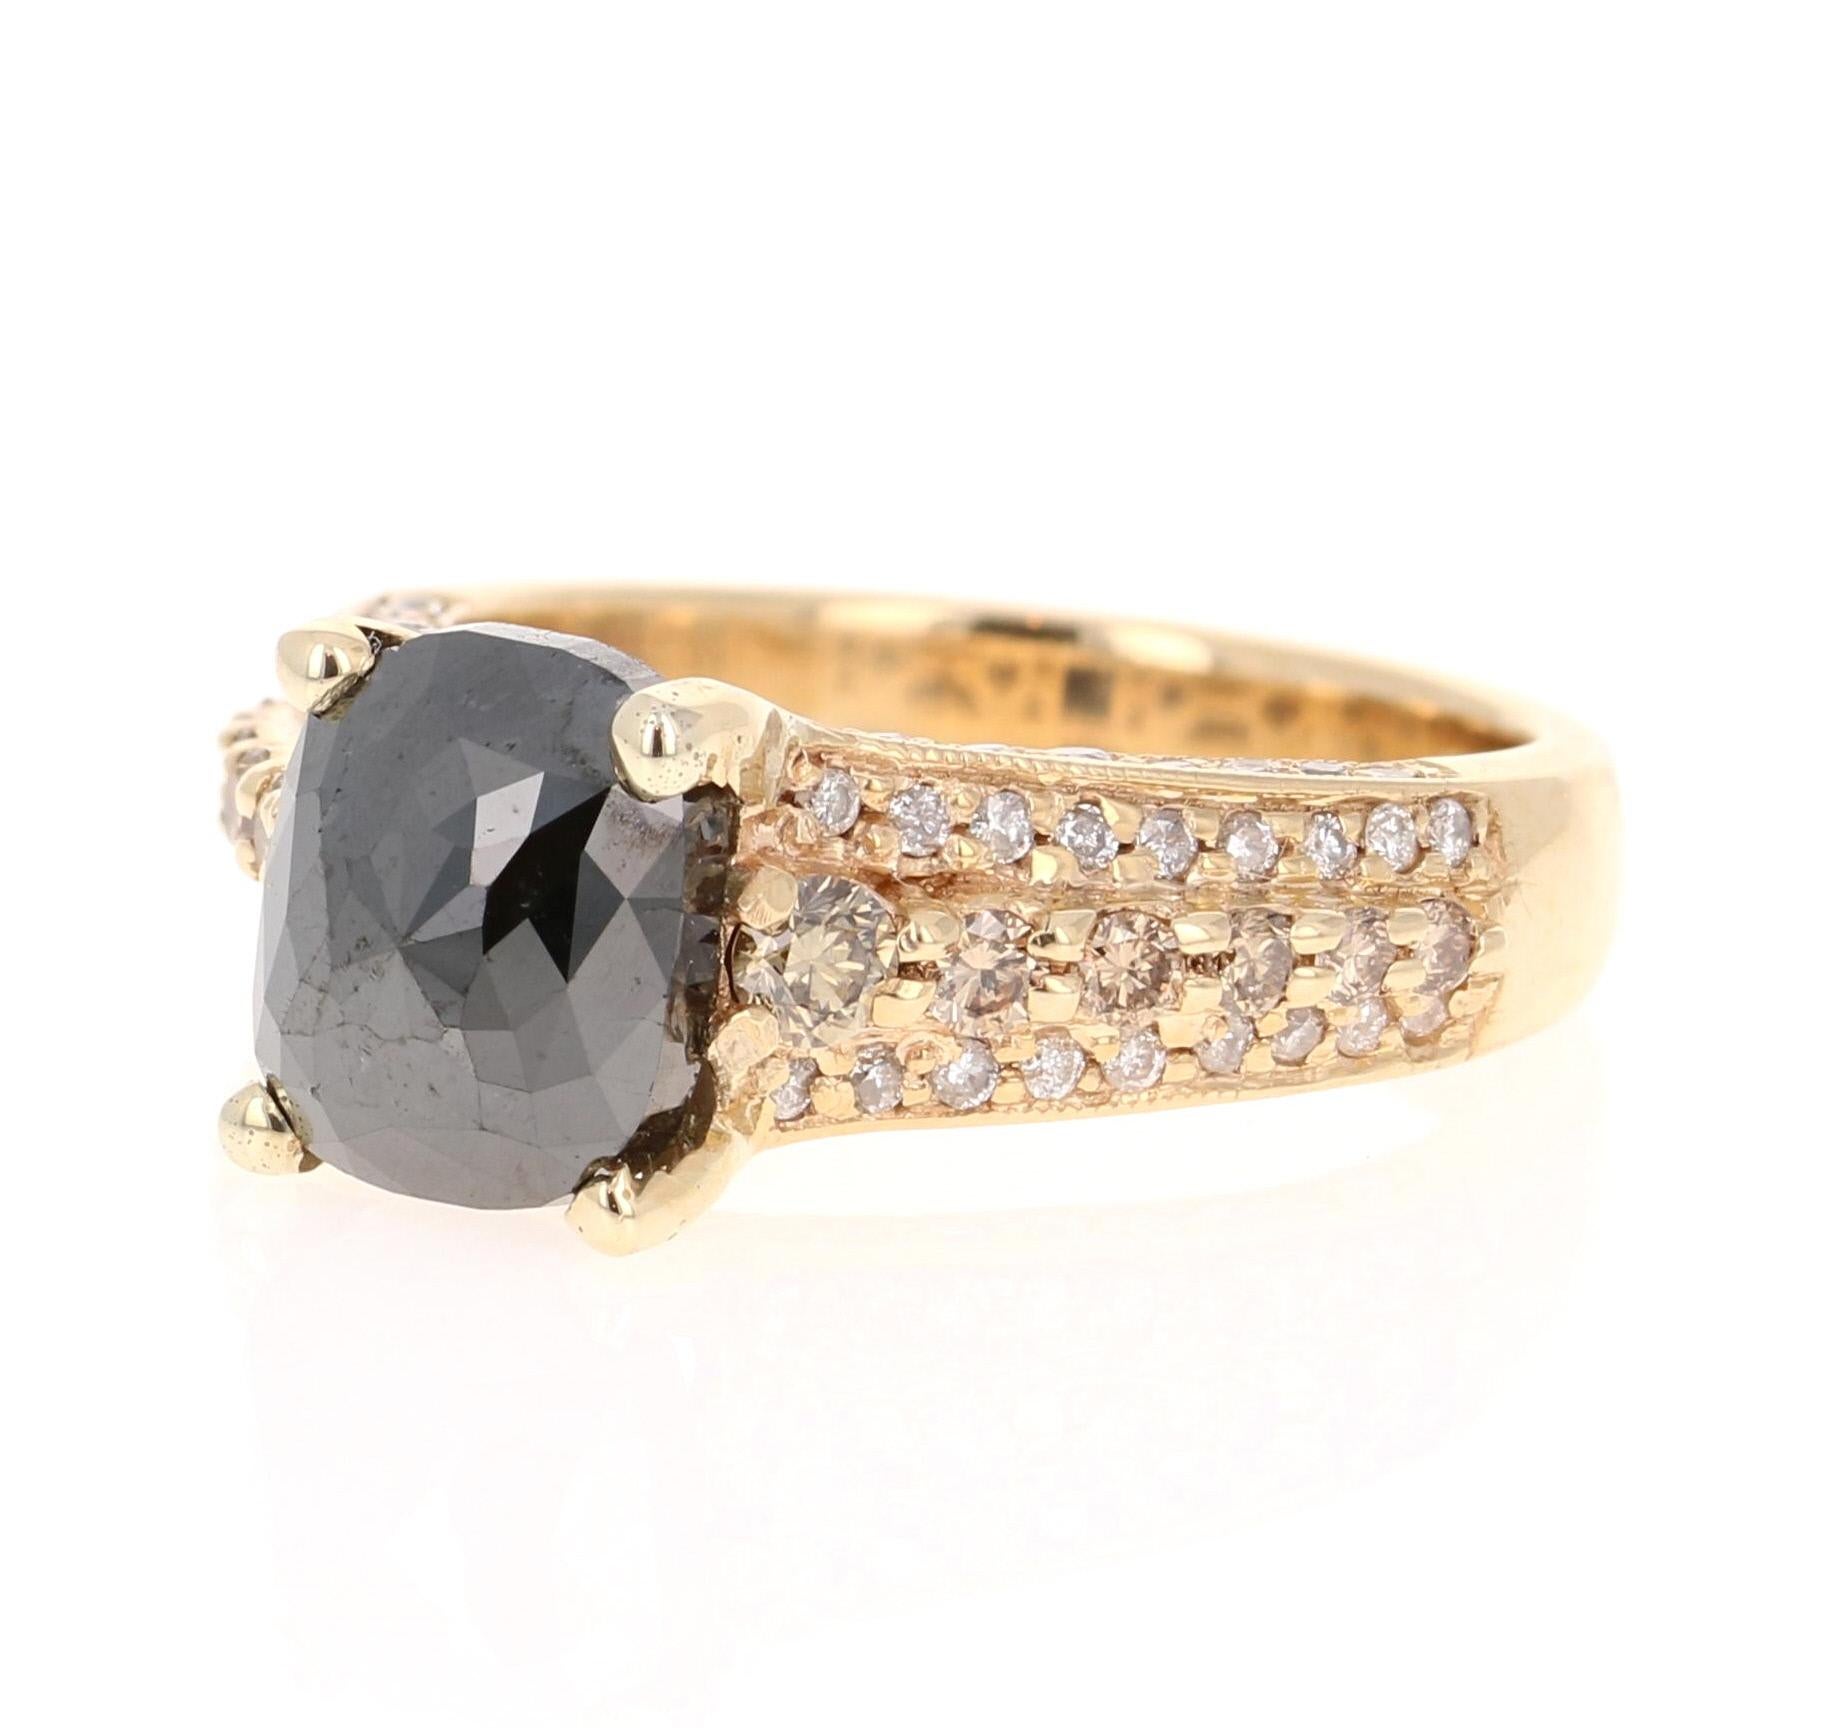 Stunning Black, White, and Brown/Champagne Diamond Cocktail or Engagement Ring that is a nothing but a Statement! 

The Cushion/Oval Cut Black Diamond is 2.51 Carats and is surrounded by 12 Champagne Colored Round Cut Diamonds that weigh 0.37